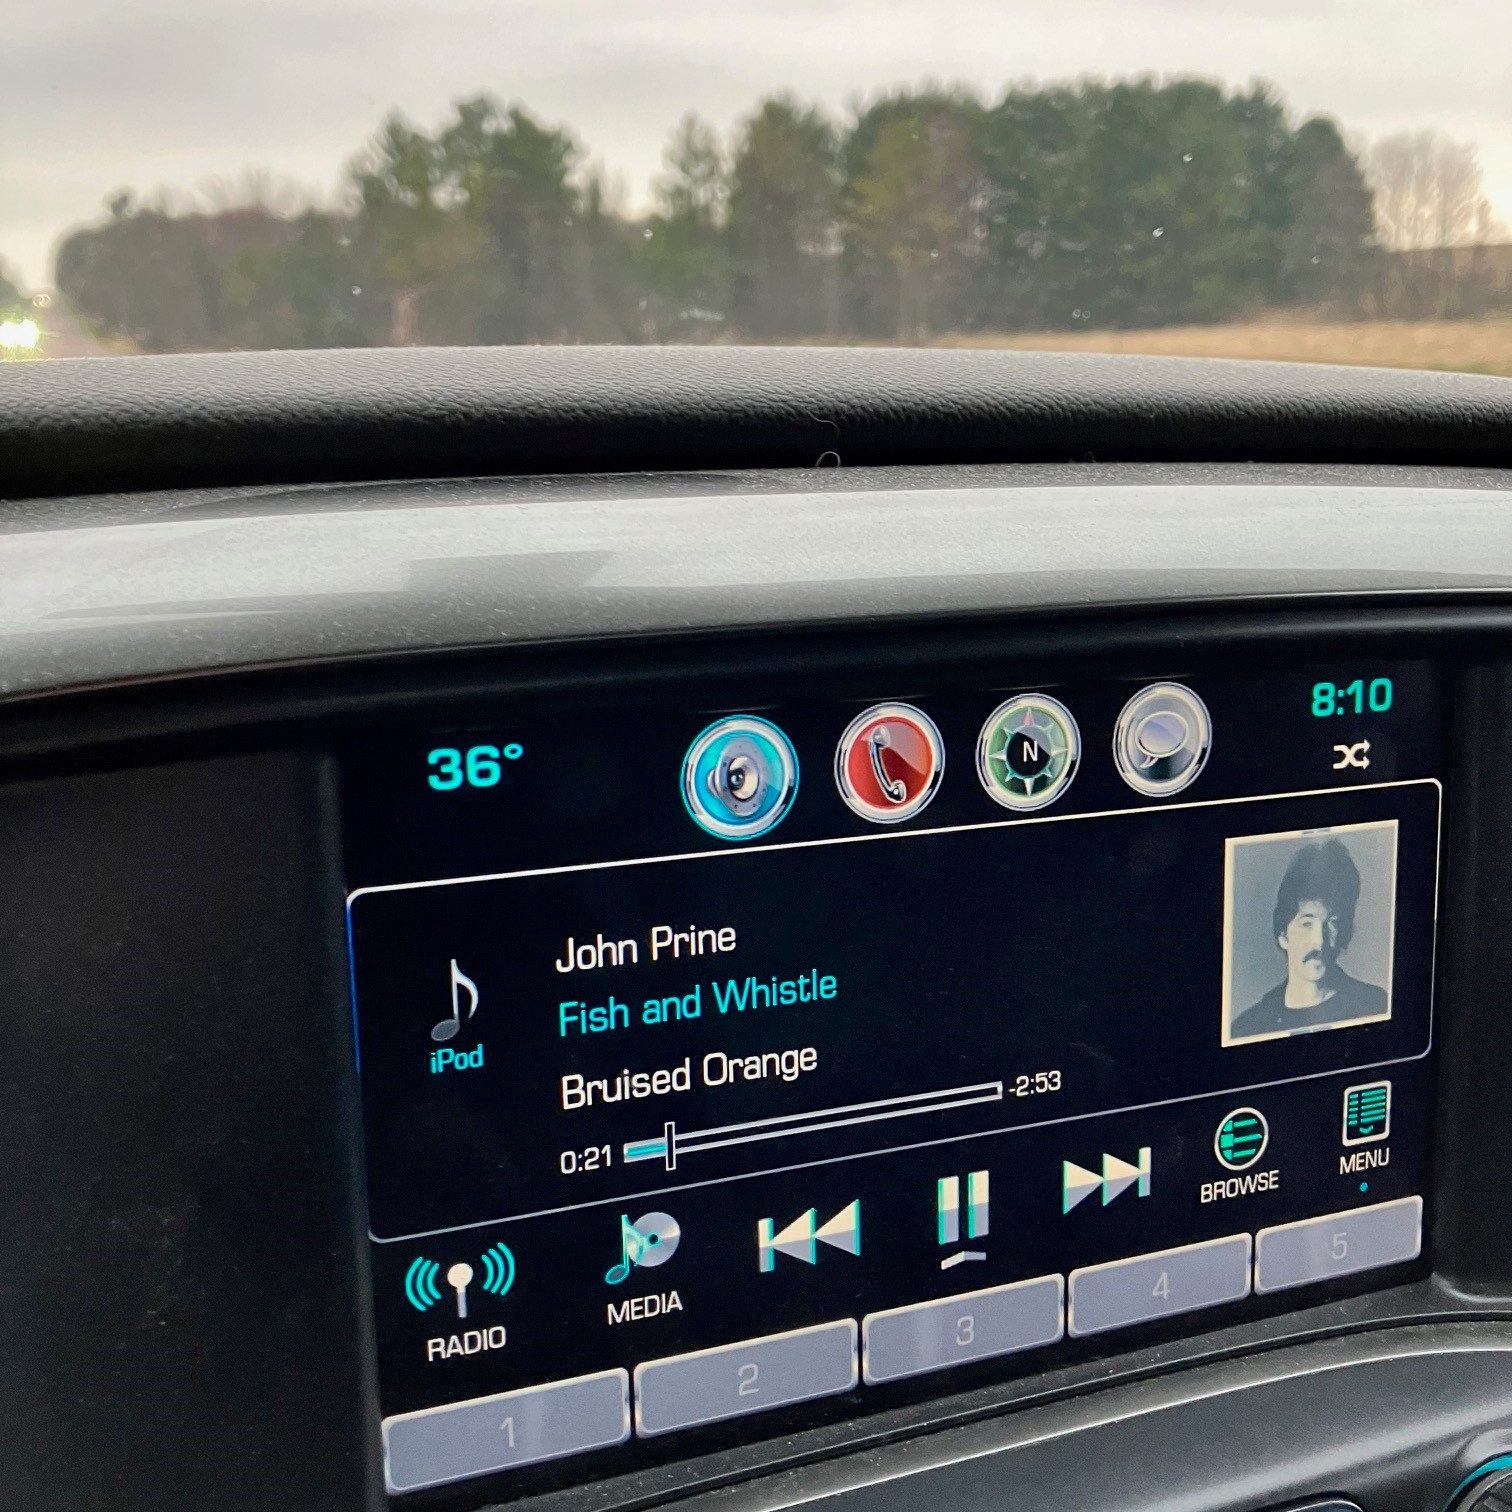 This photo shows the dashboard of a truck with a John Prine song playing